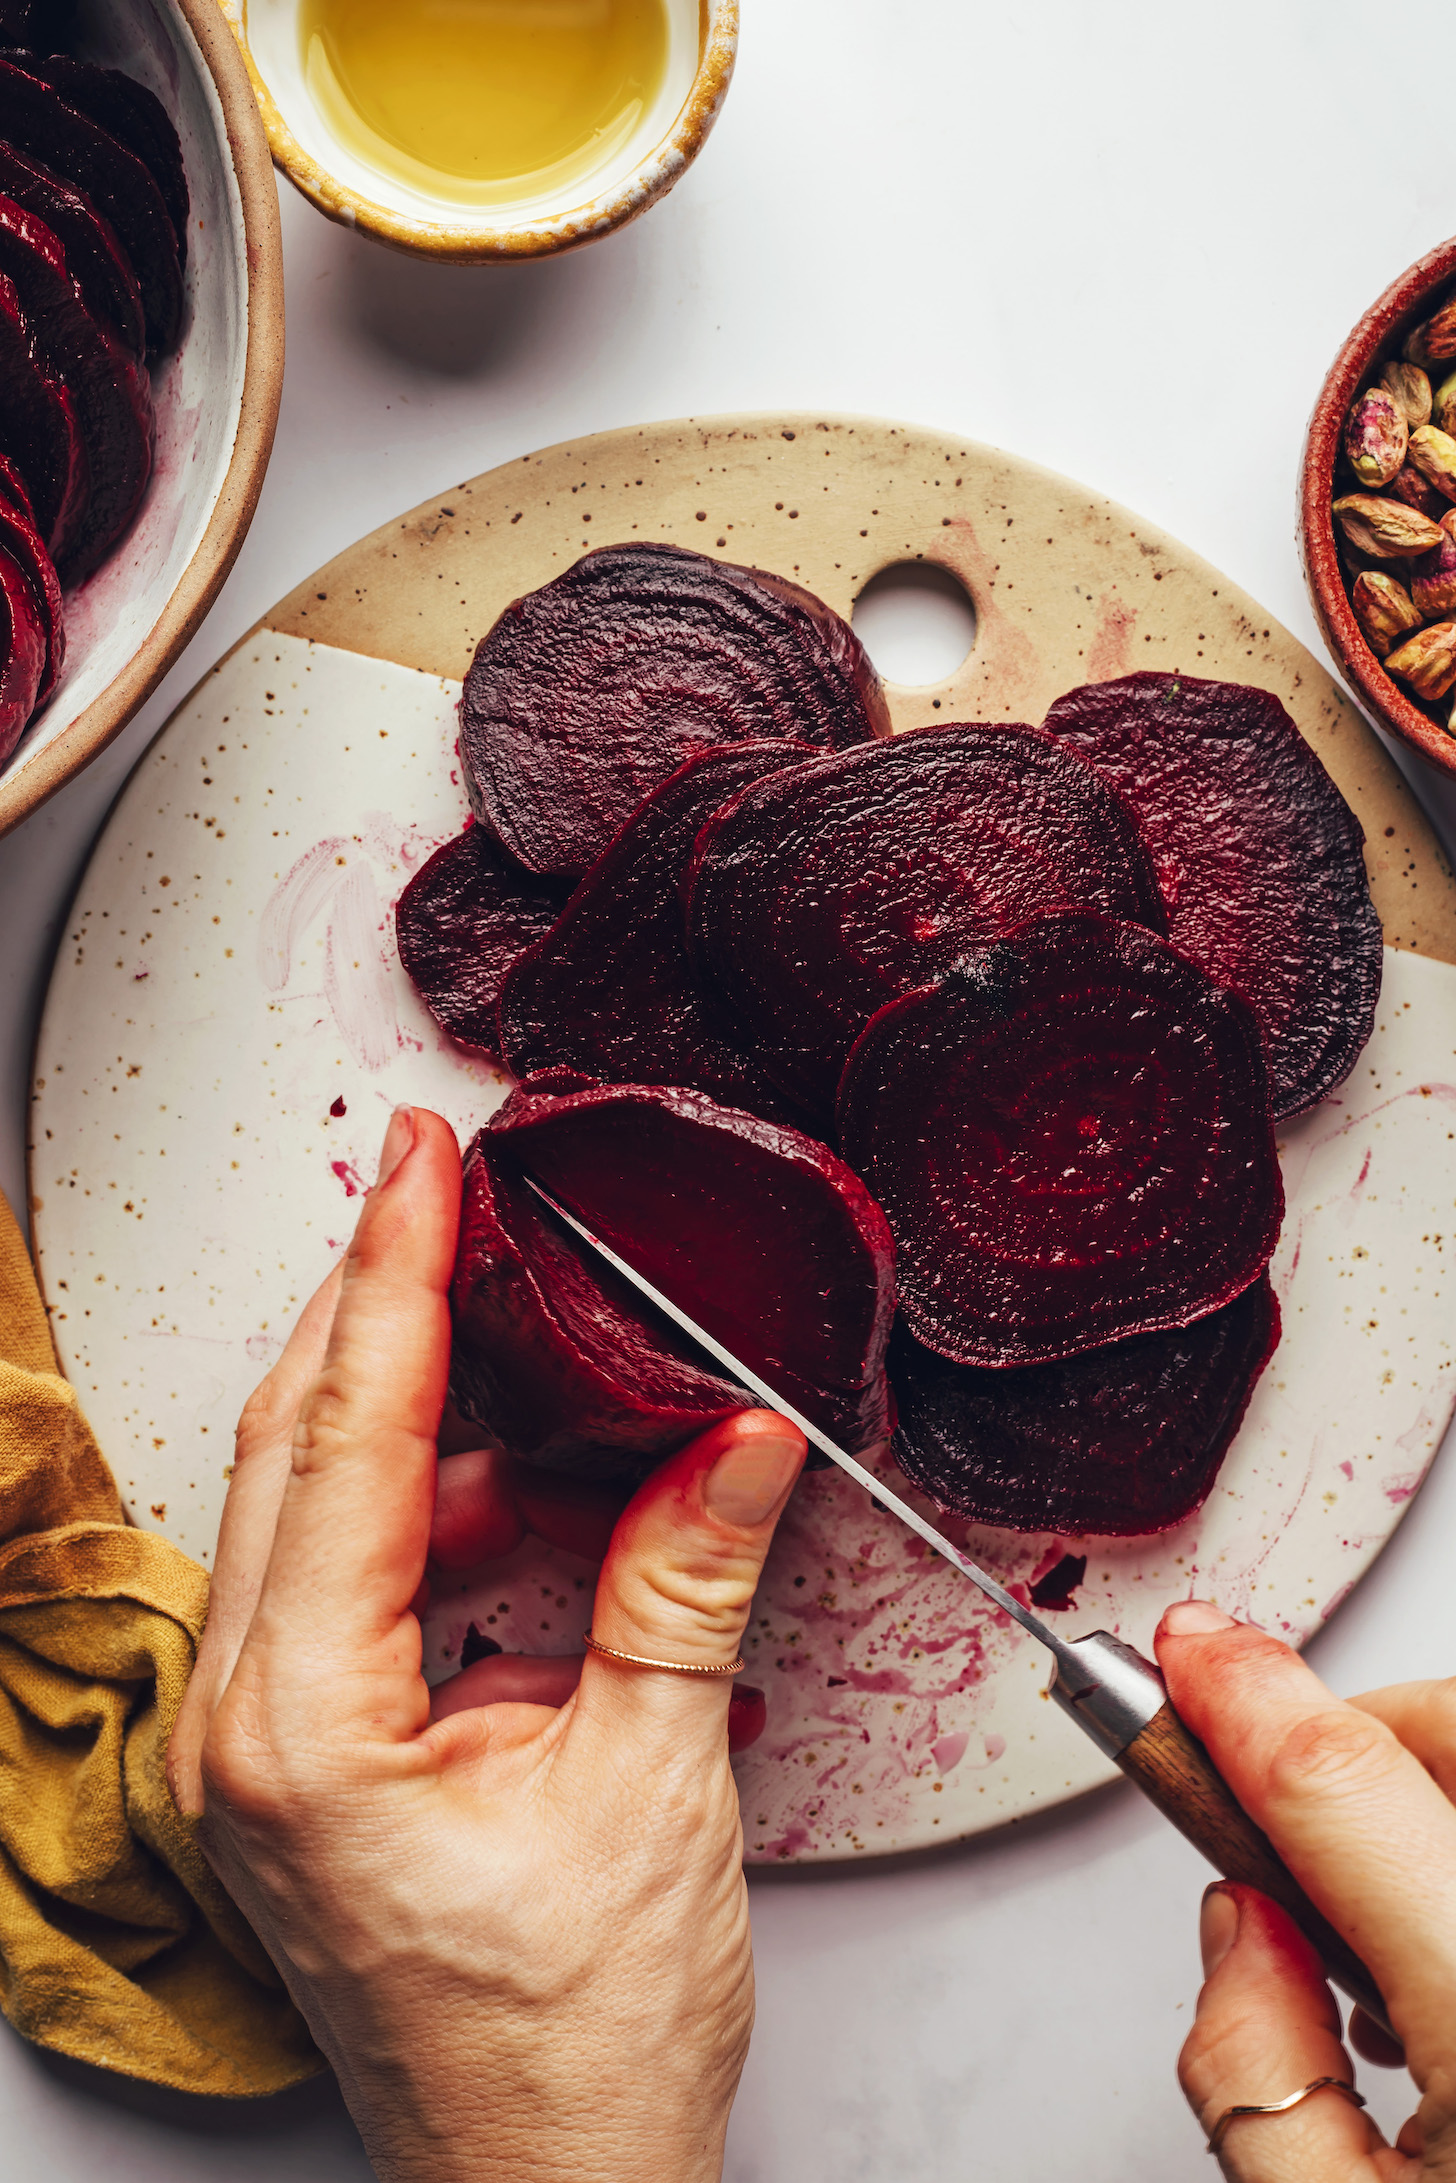 Slicing roasted beets into thin slices